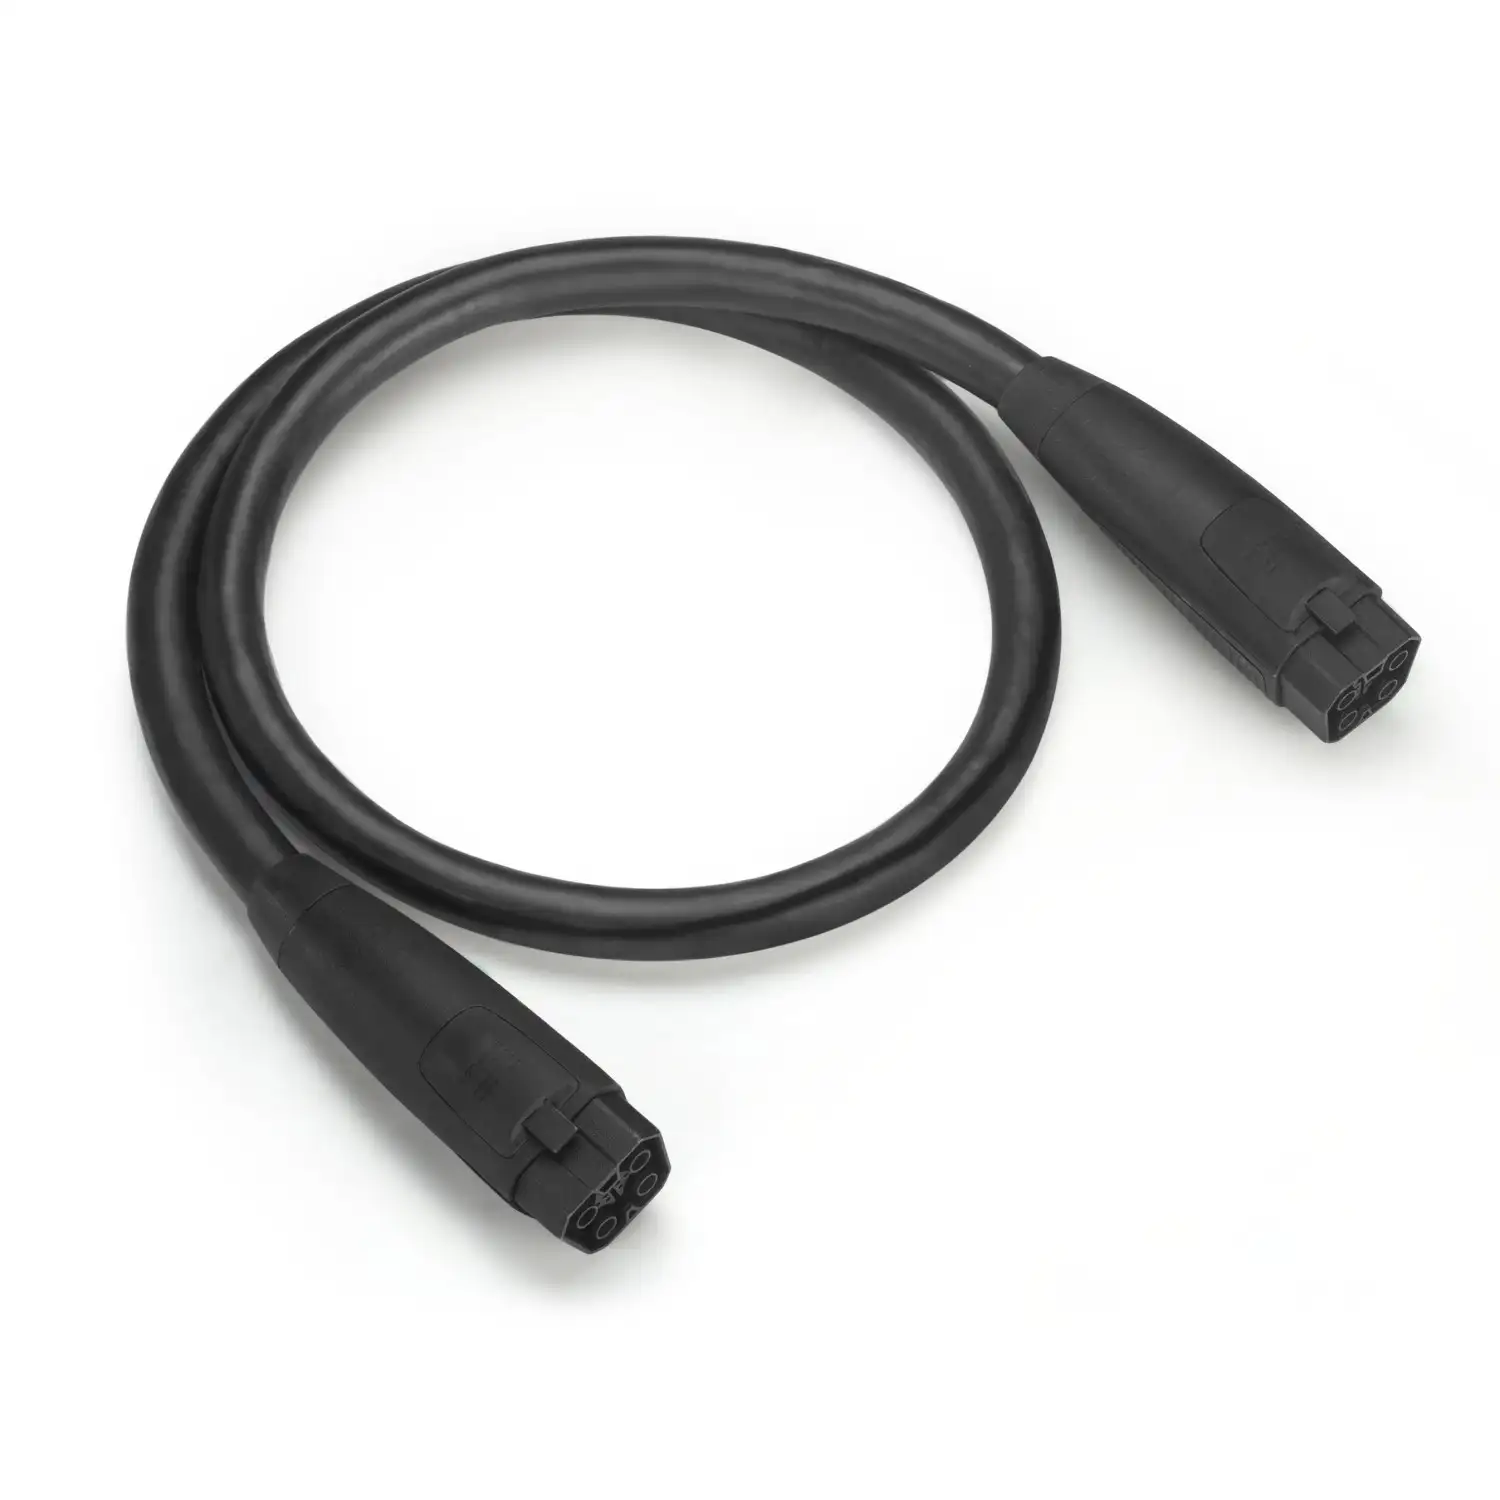 EcoFlow DELTA Pro Extra Battery Connection Cable (0.75m)